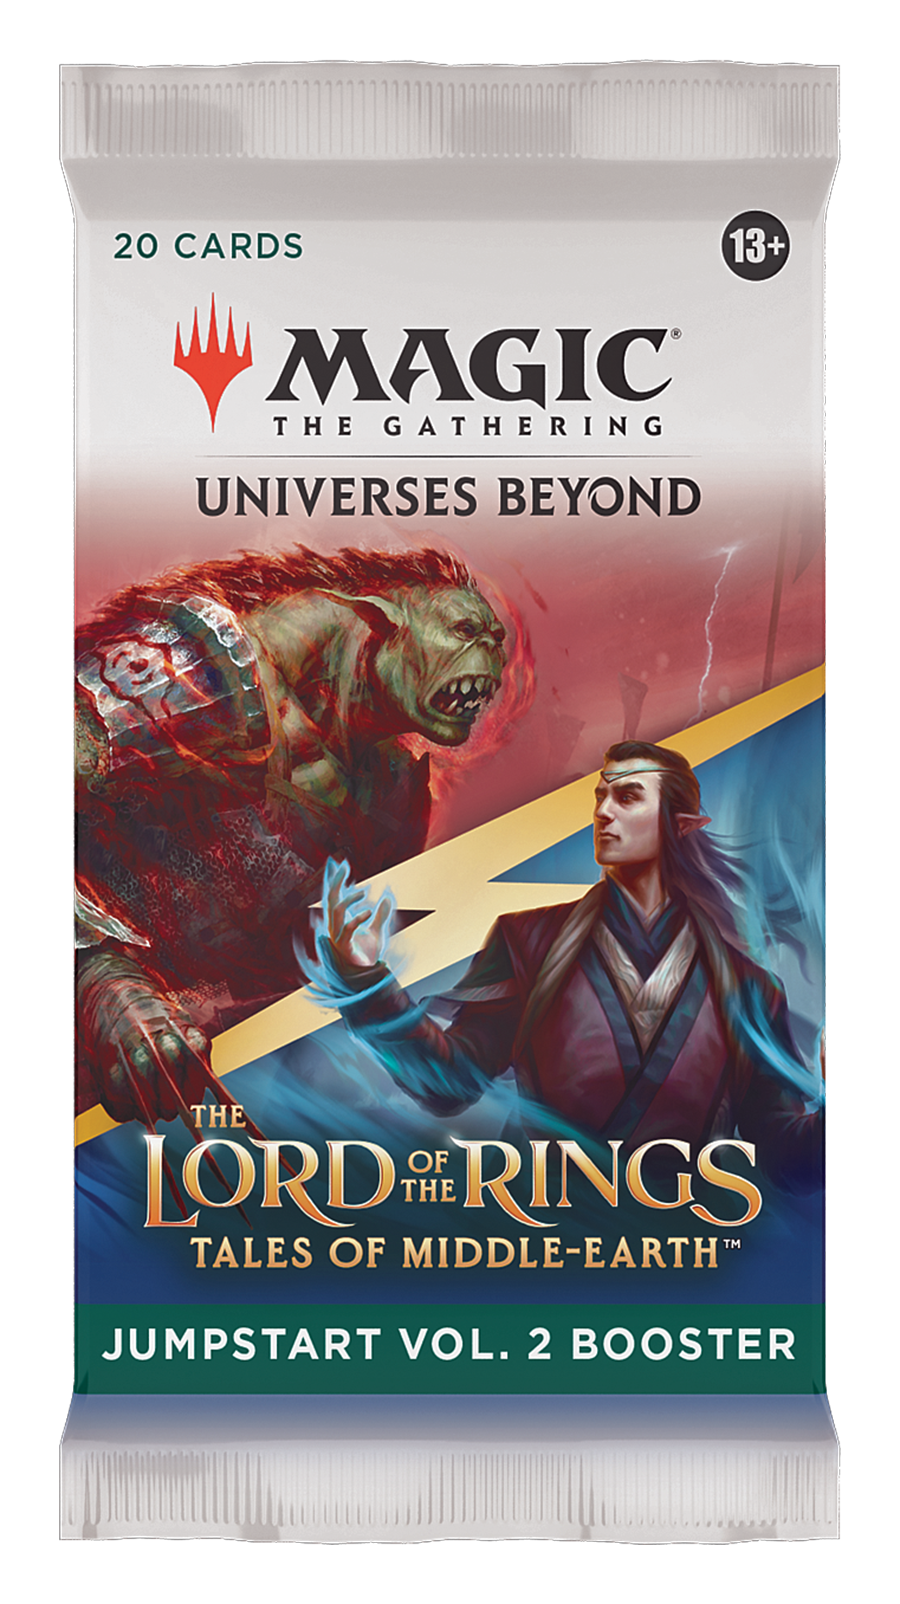 Magic The Gathering The Lord of the Rings Tales of Middleearth Jumpstart Vol. 2 Booster